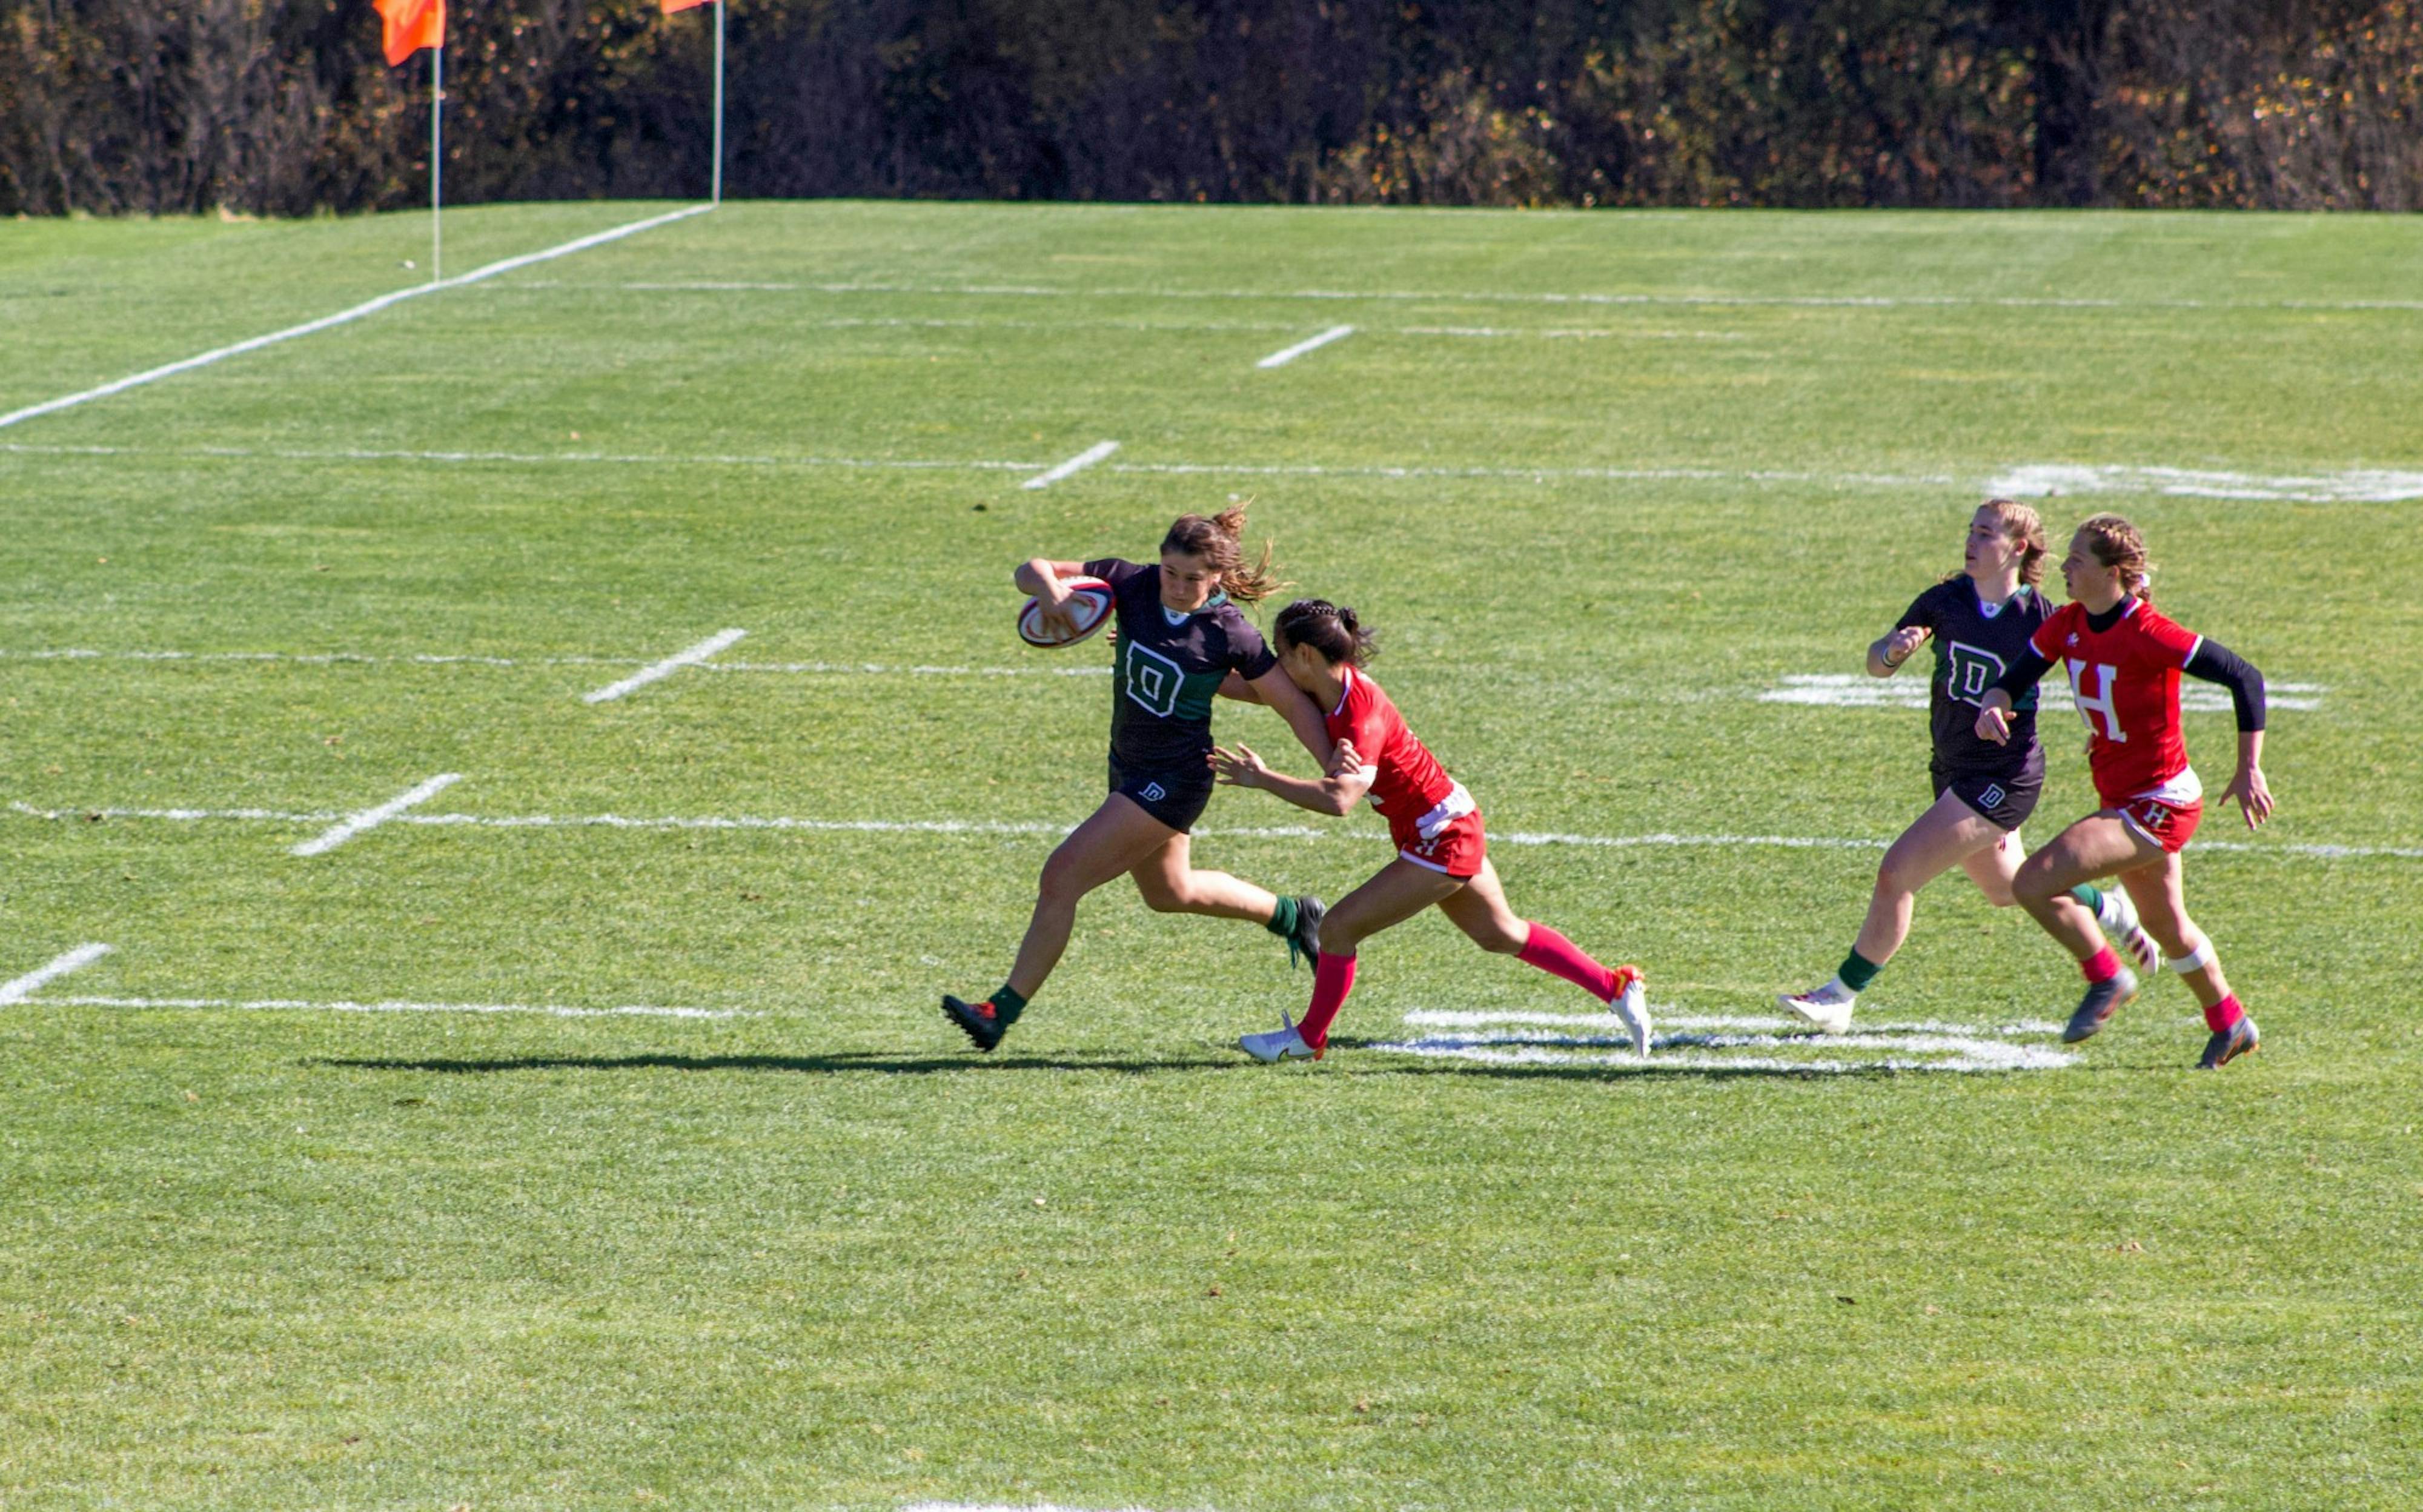 1-5-22-wrugby-maddiecook